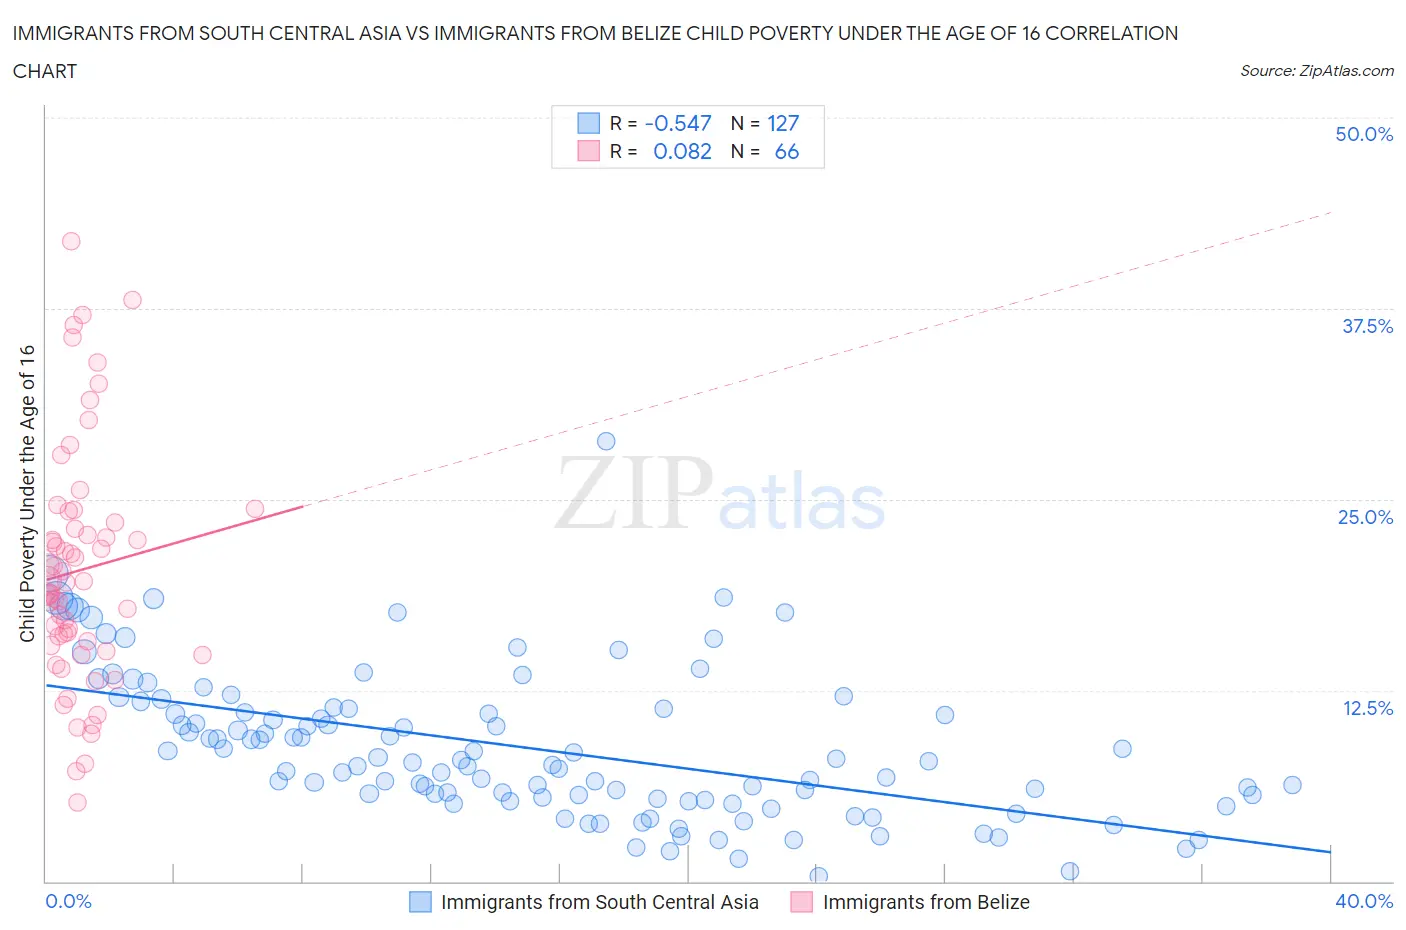 Immigrants from South Central Asia vs Immigrants from Belize Child Poverty Under the Age of 16